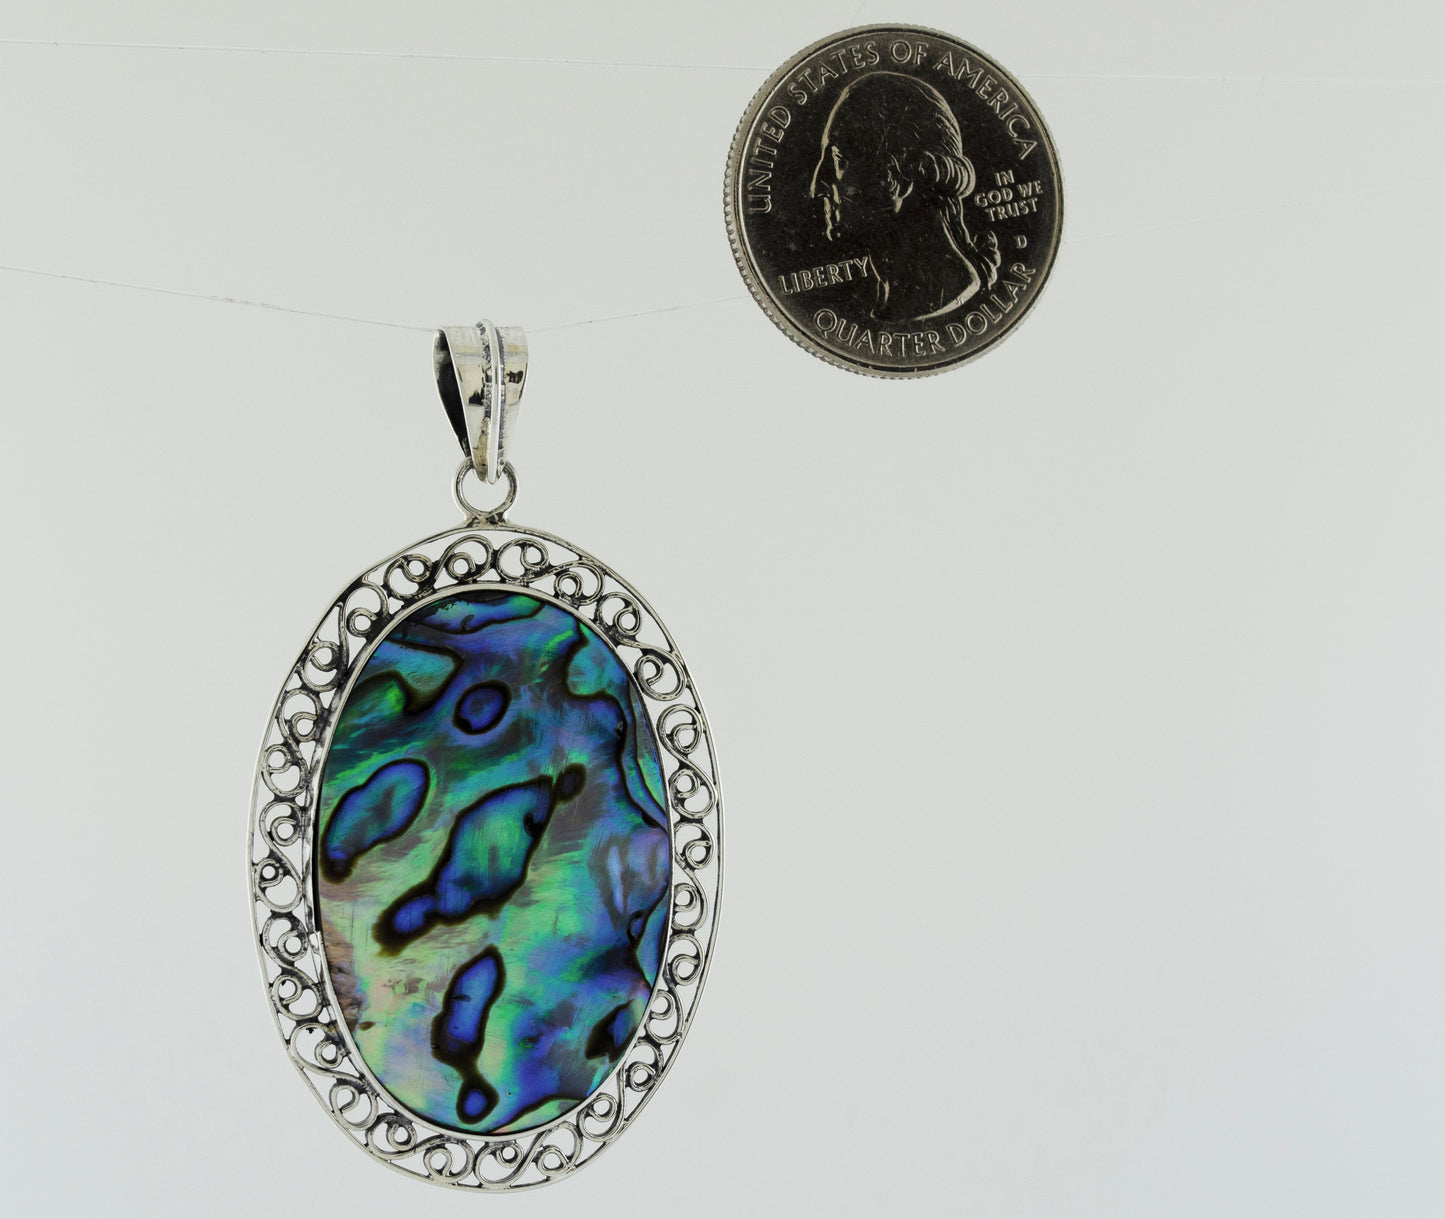 A statement piece pendant featuring an Oval Abalone Pendant with filigree border made by Super Silver.